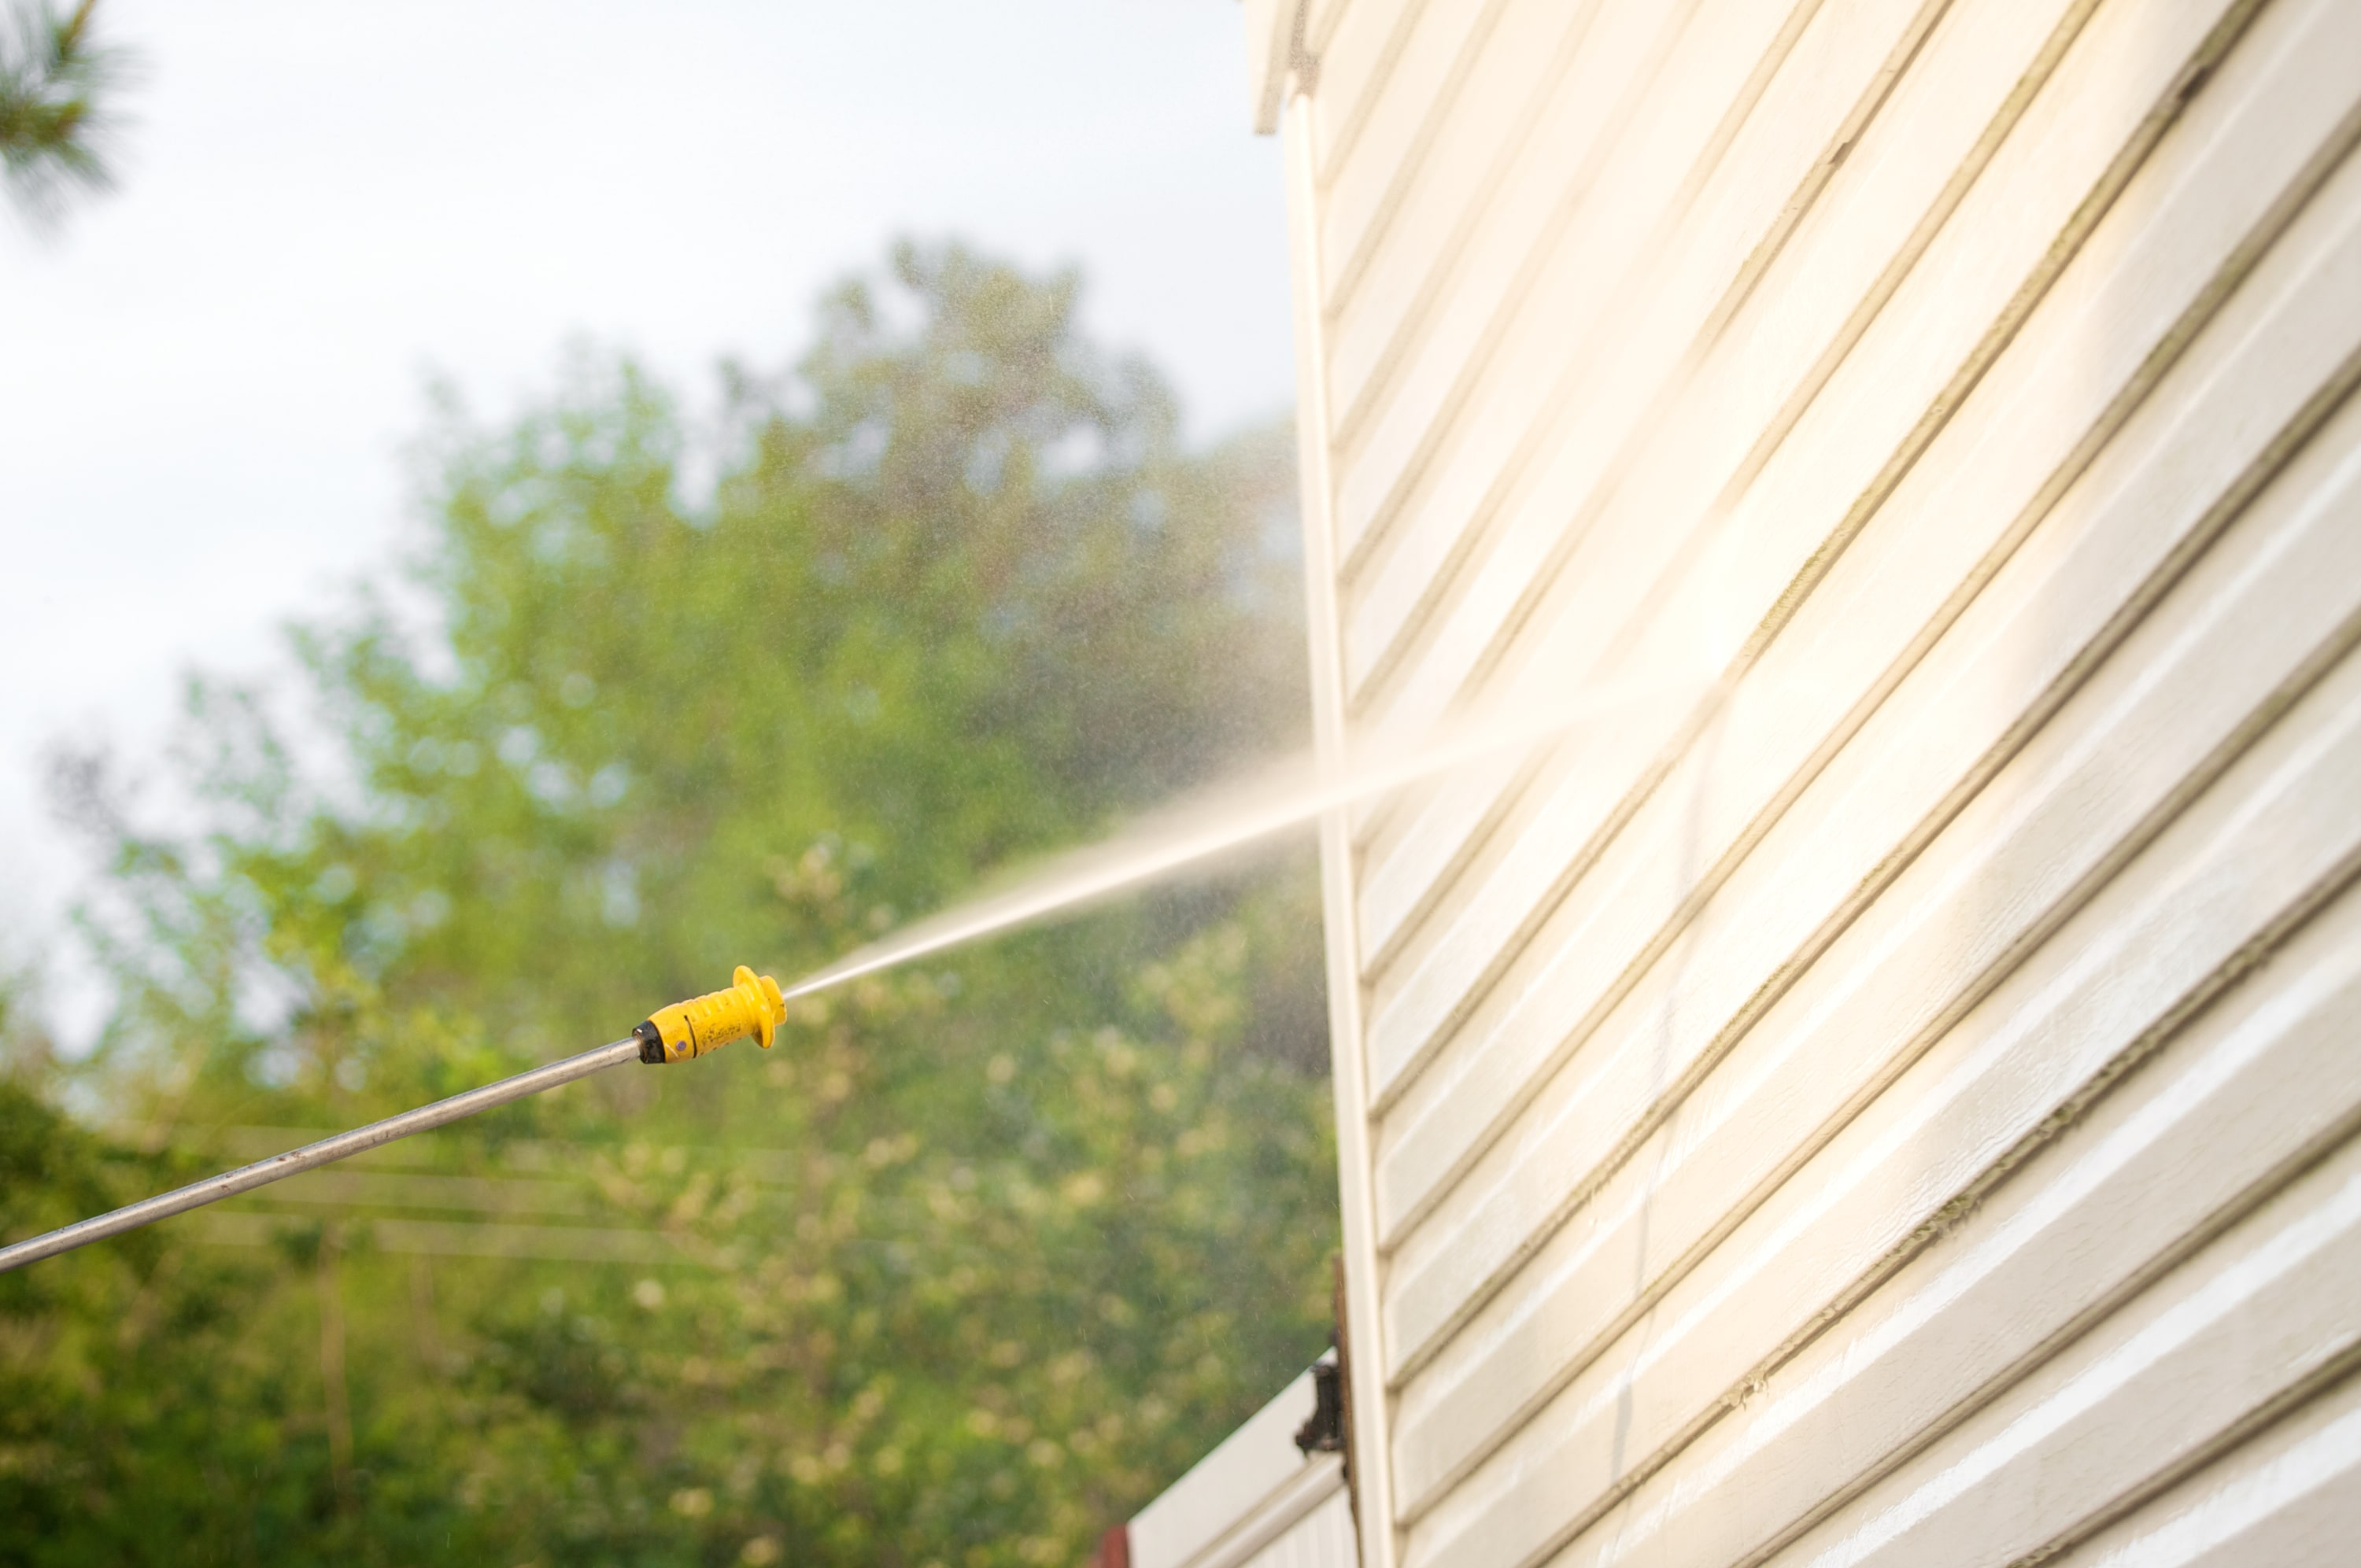 A pressure washer blasting water at the exterior siding of a home.